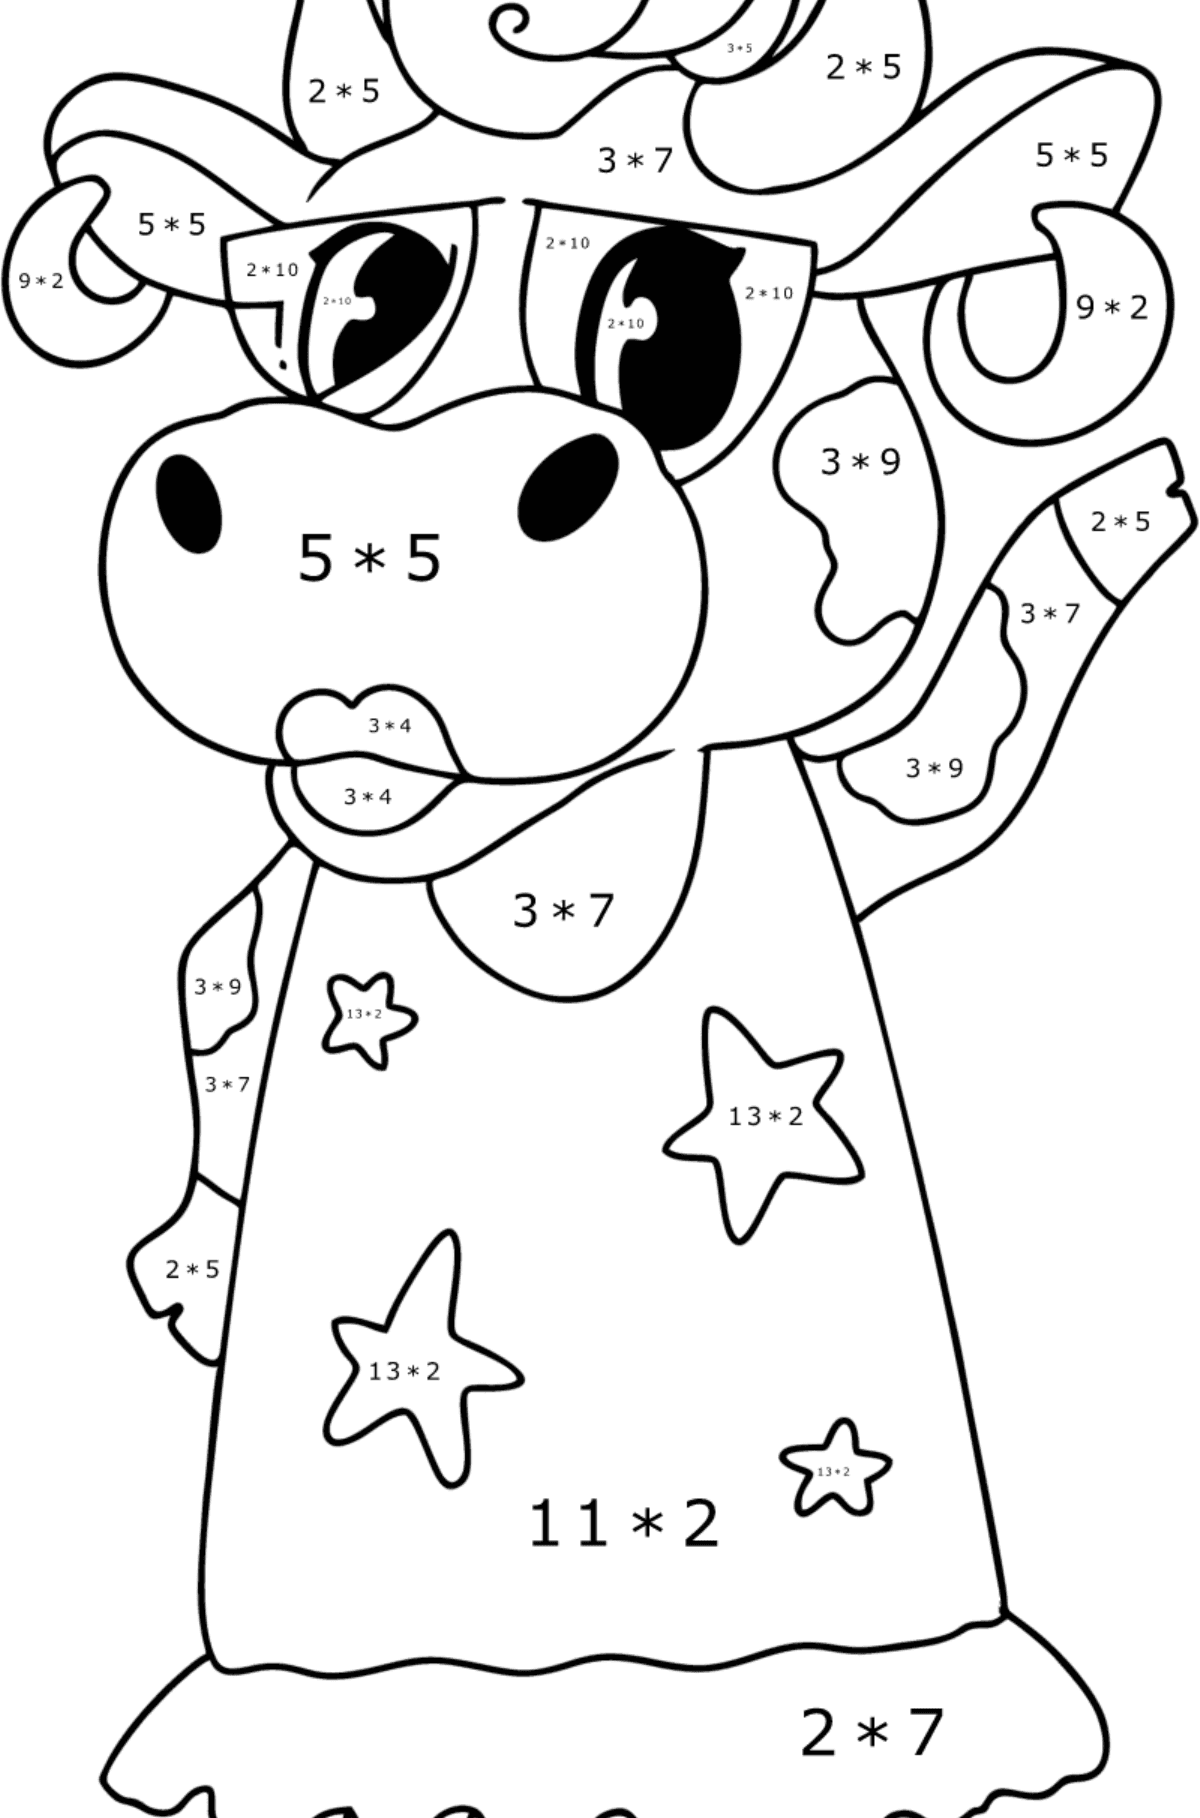 Cartoon cow standing up coloring page - Math Coloring - Multiplication for Kids